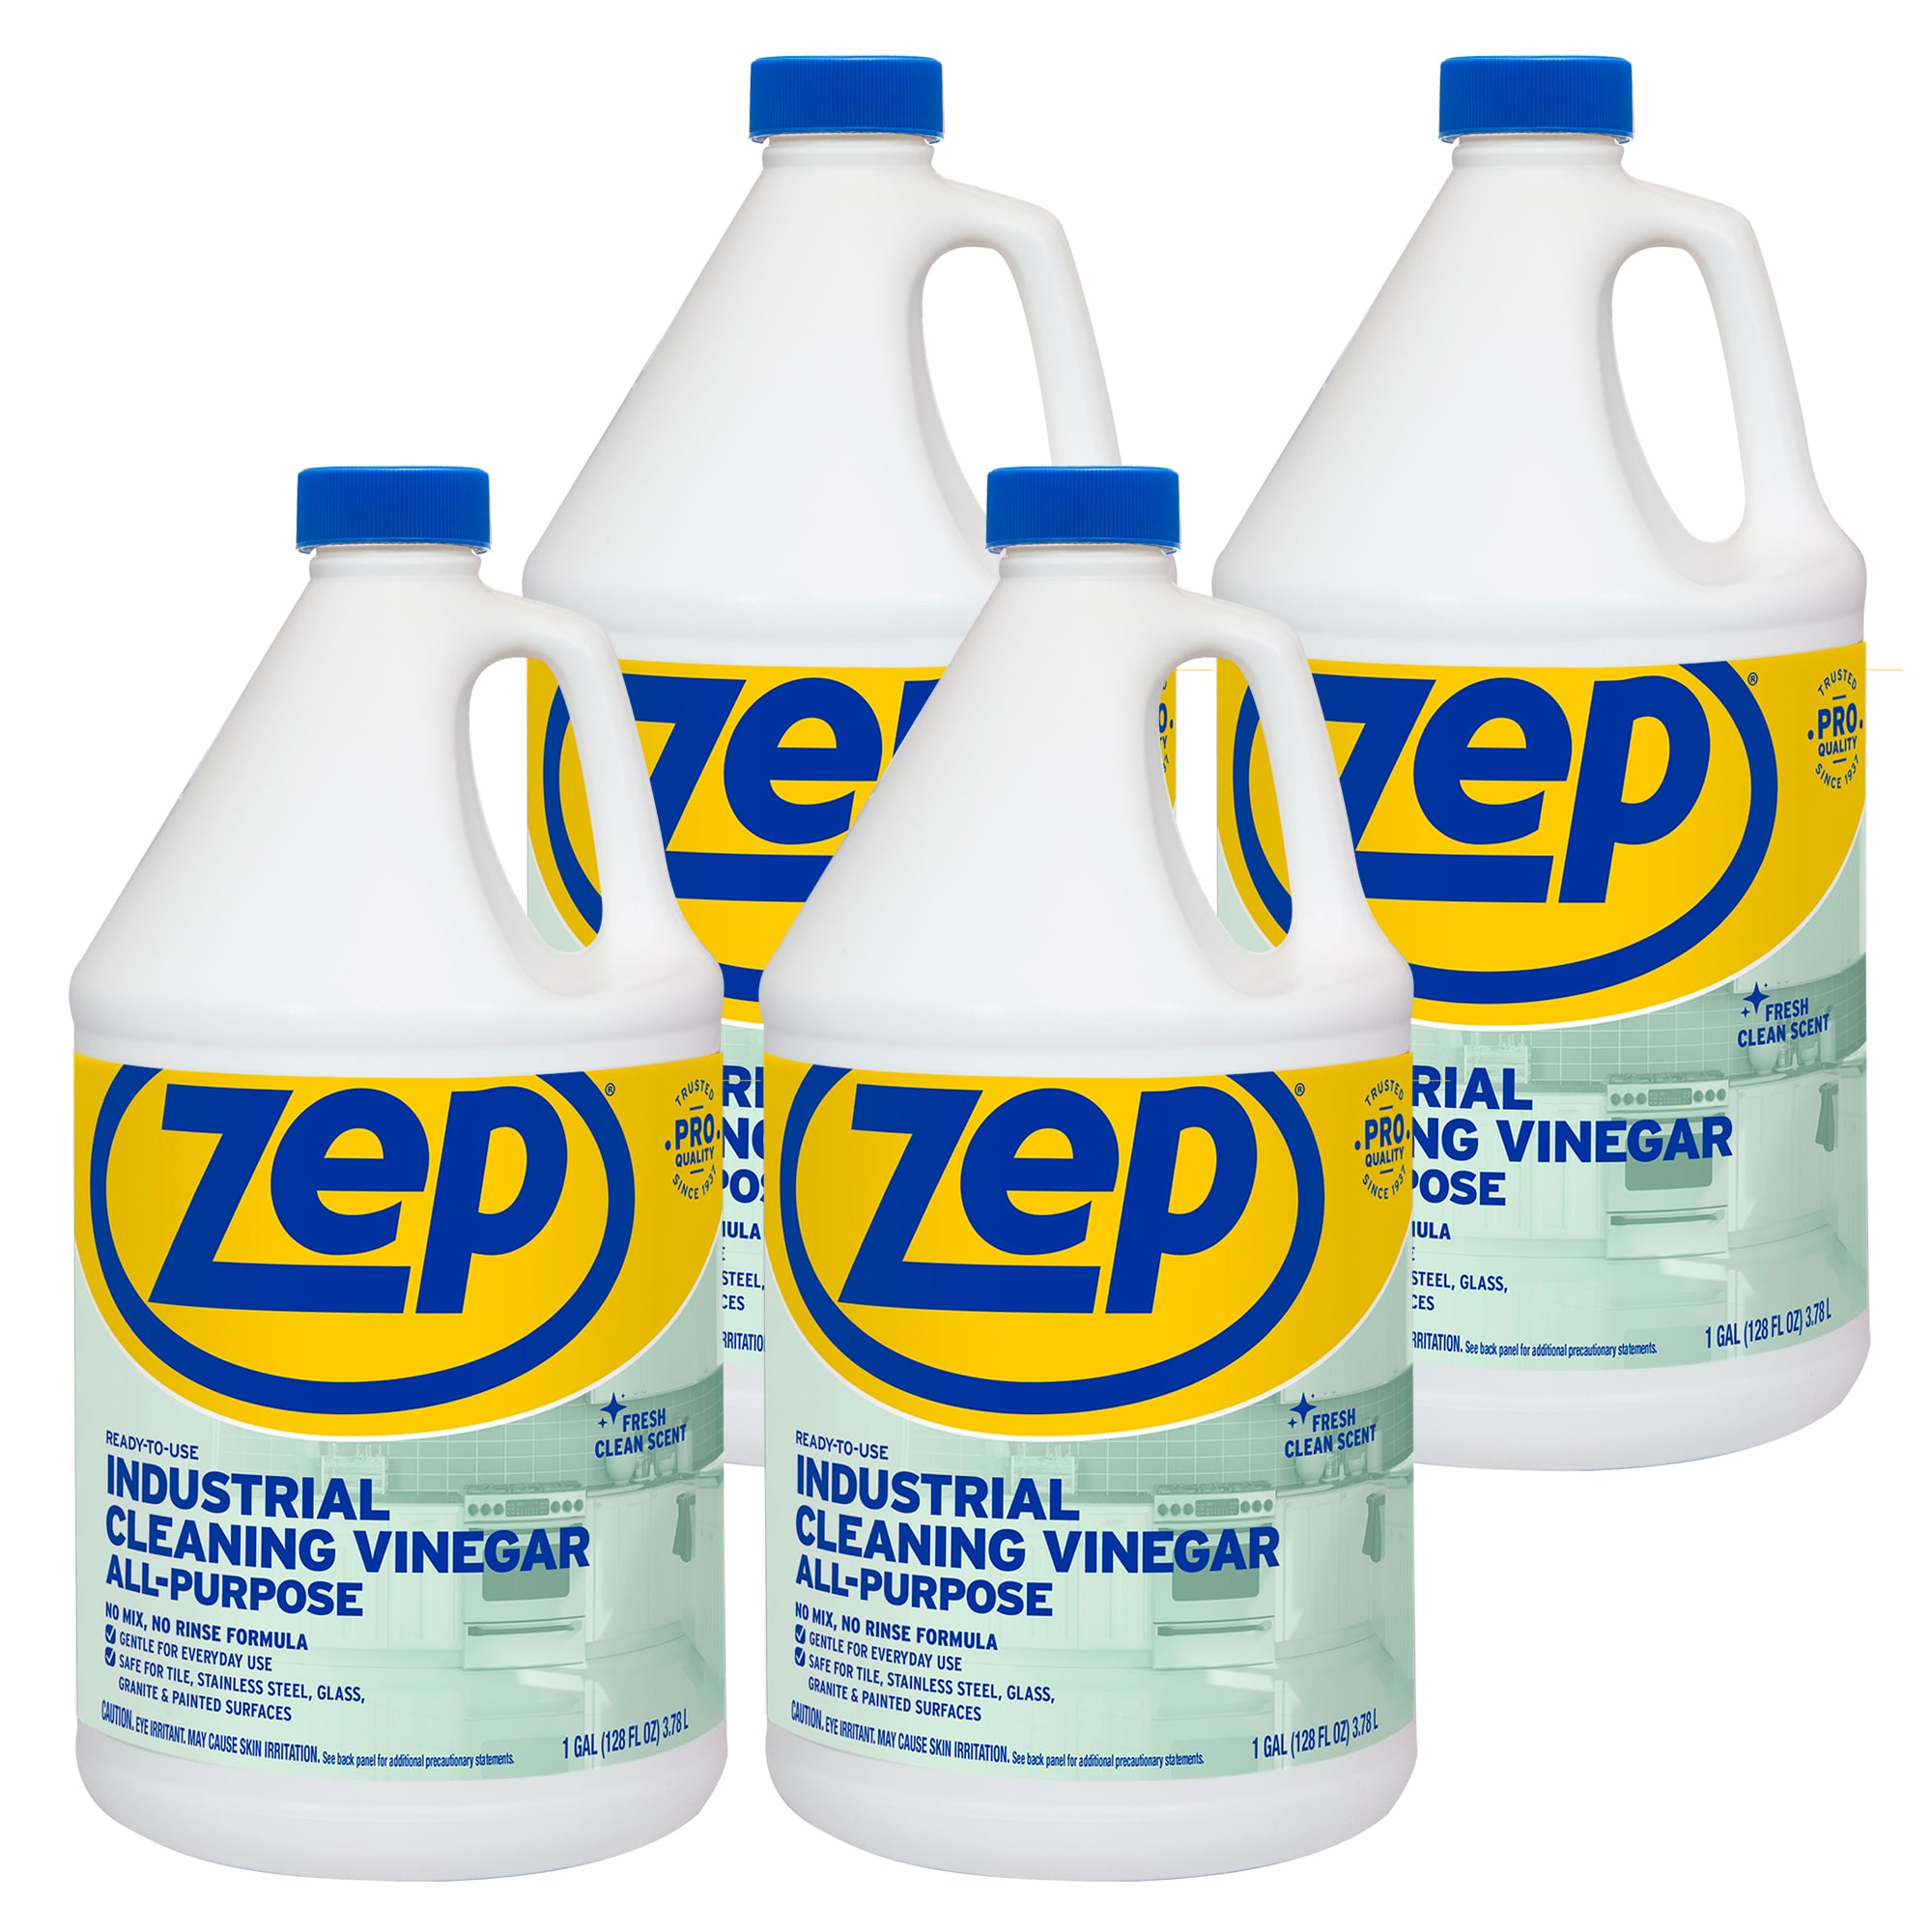 Zep 32 fl. oz. Grout Cleaner and Brightener (Pack of 8)